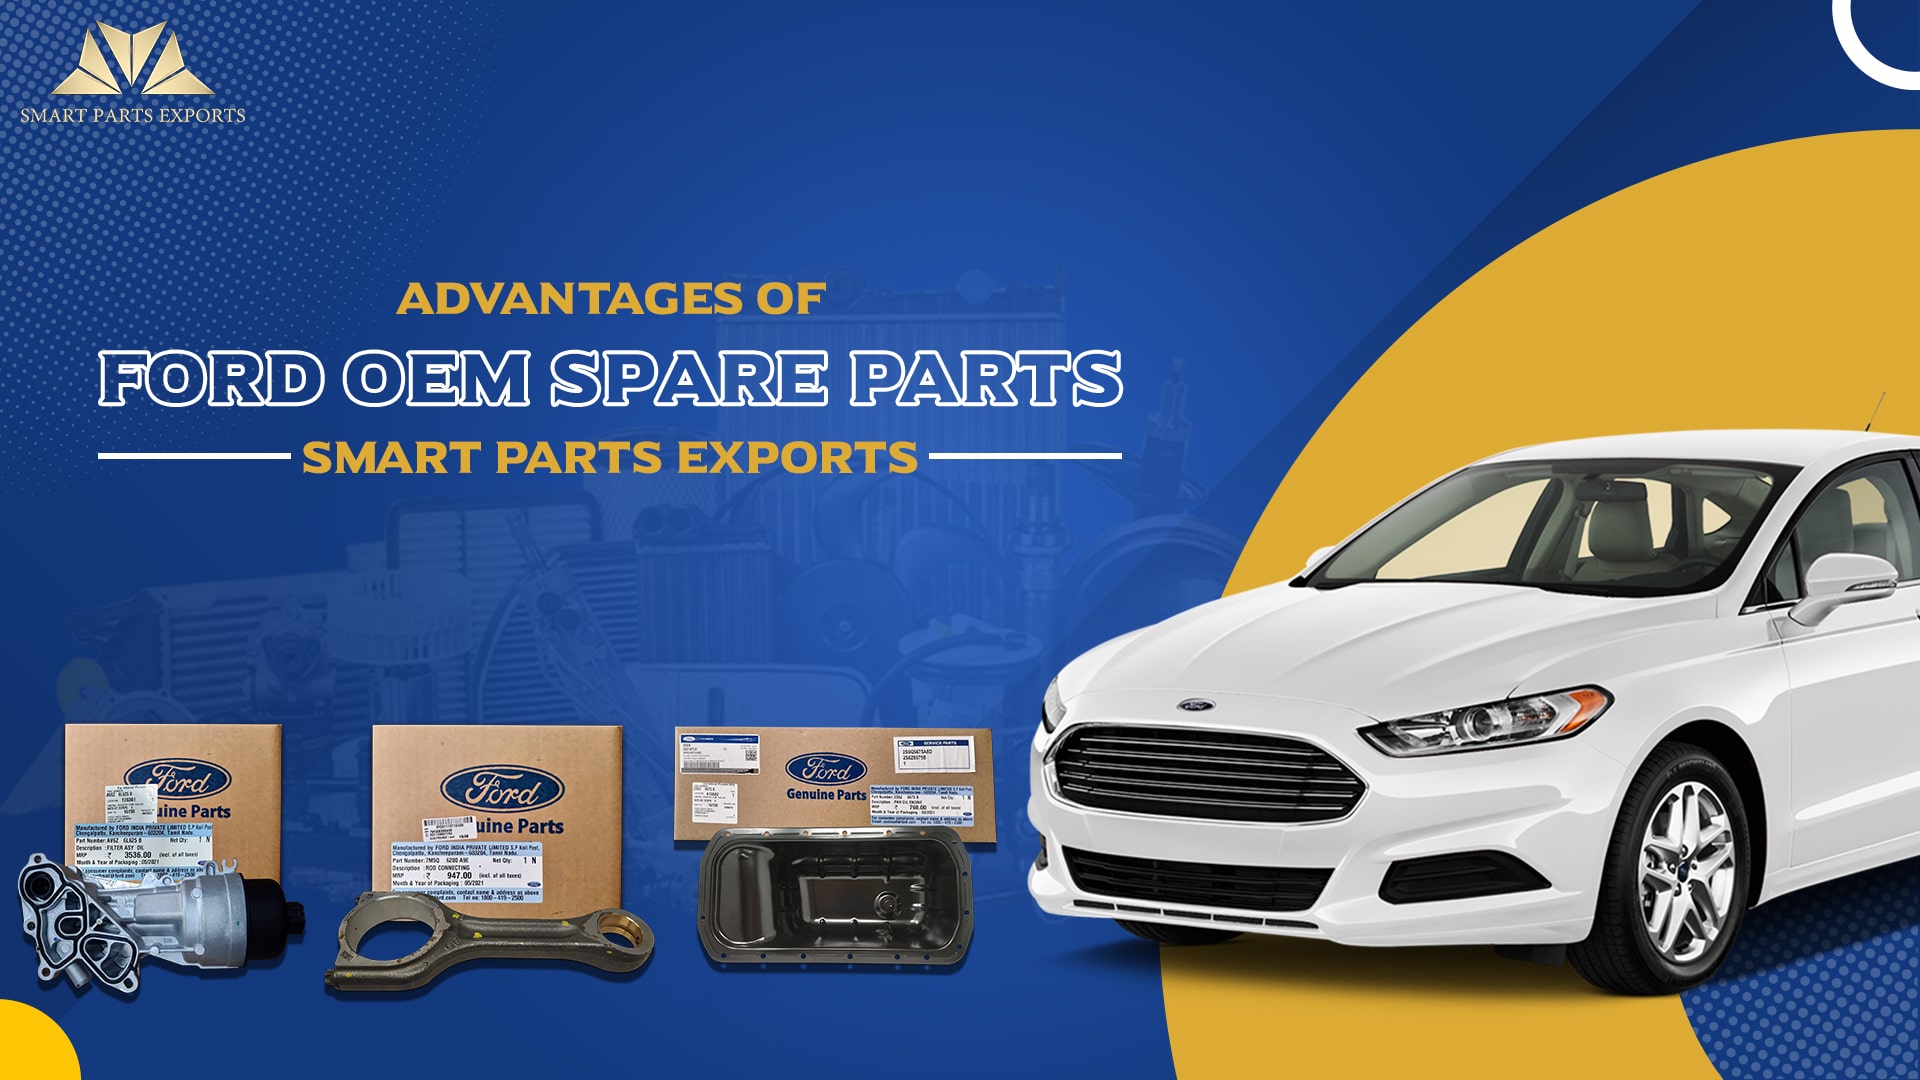 Advantages of Ford OEM Spare Parts: Smart Parts Exports